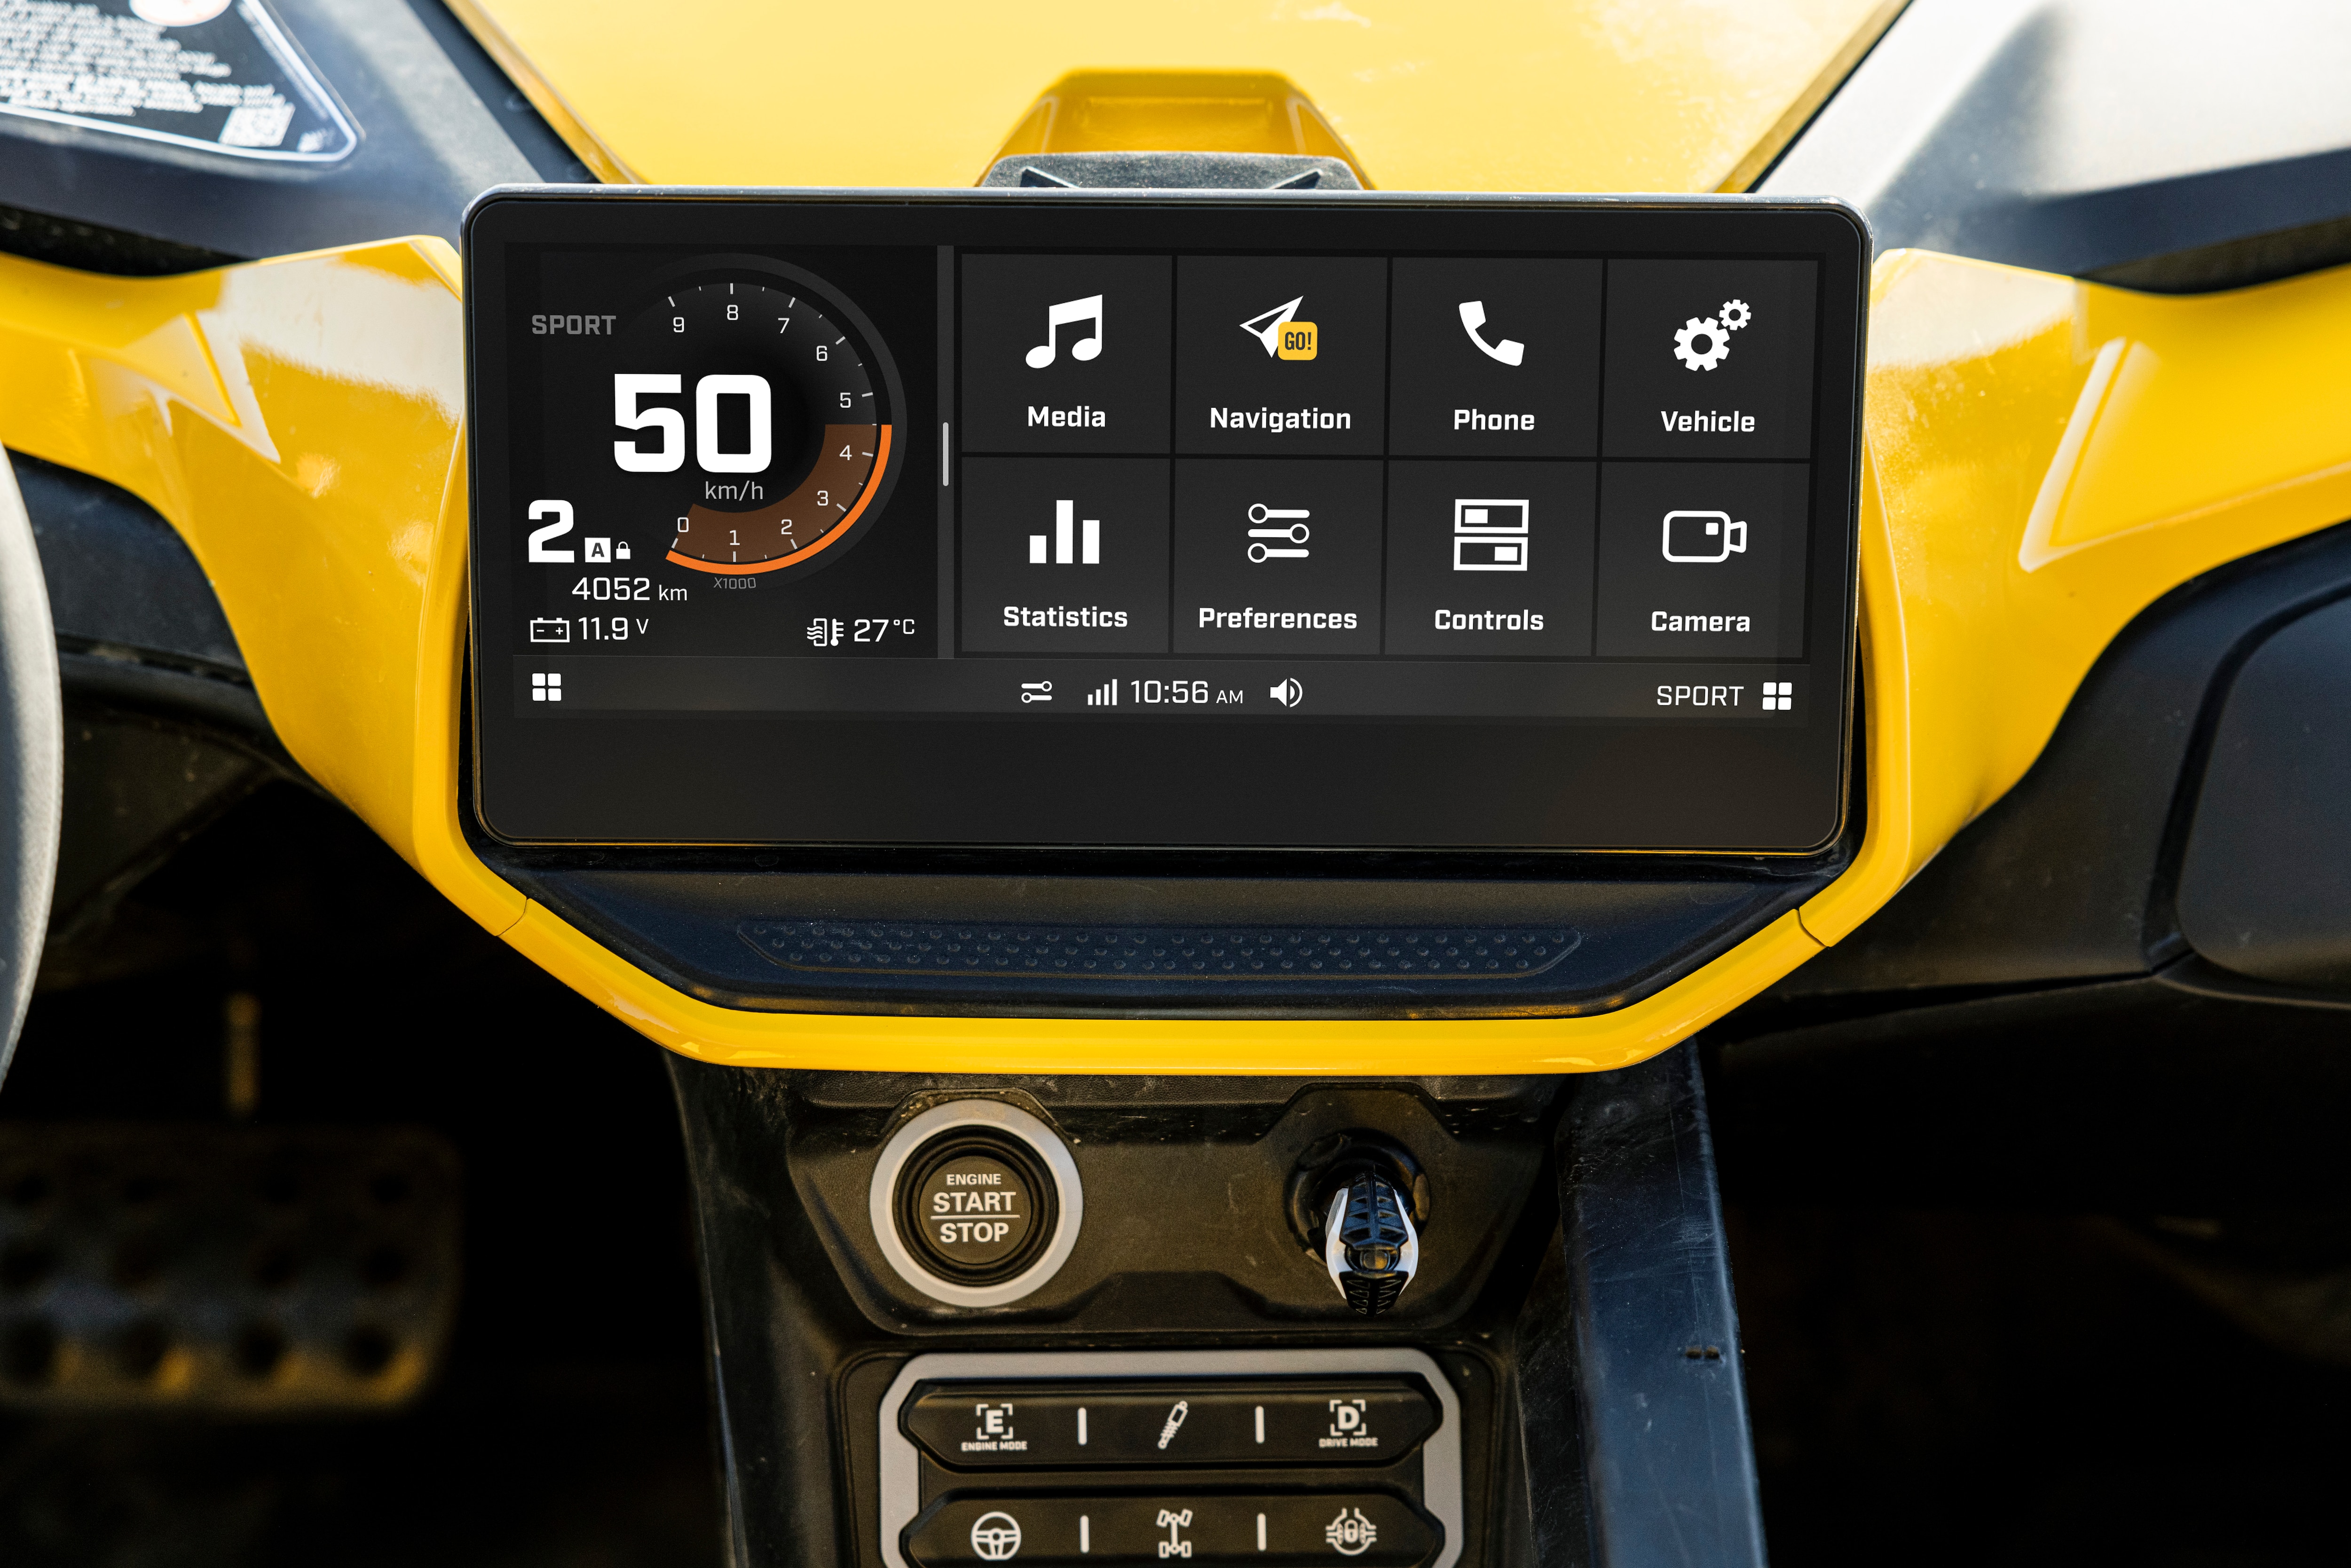 Applet menu on the Can-Am 10.25" Touchscreen Display